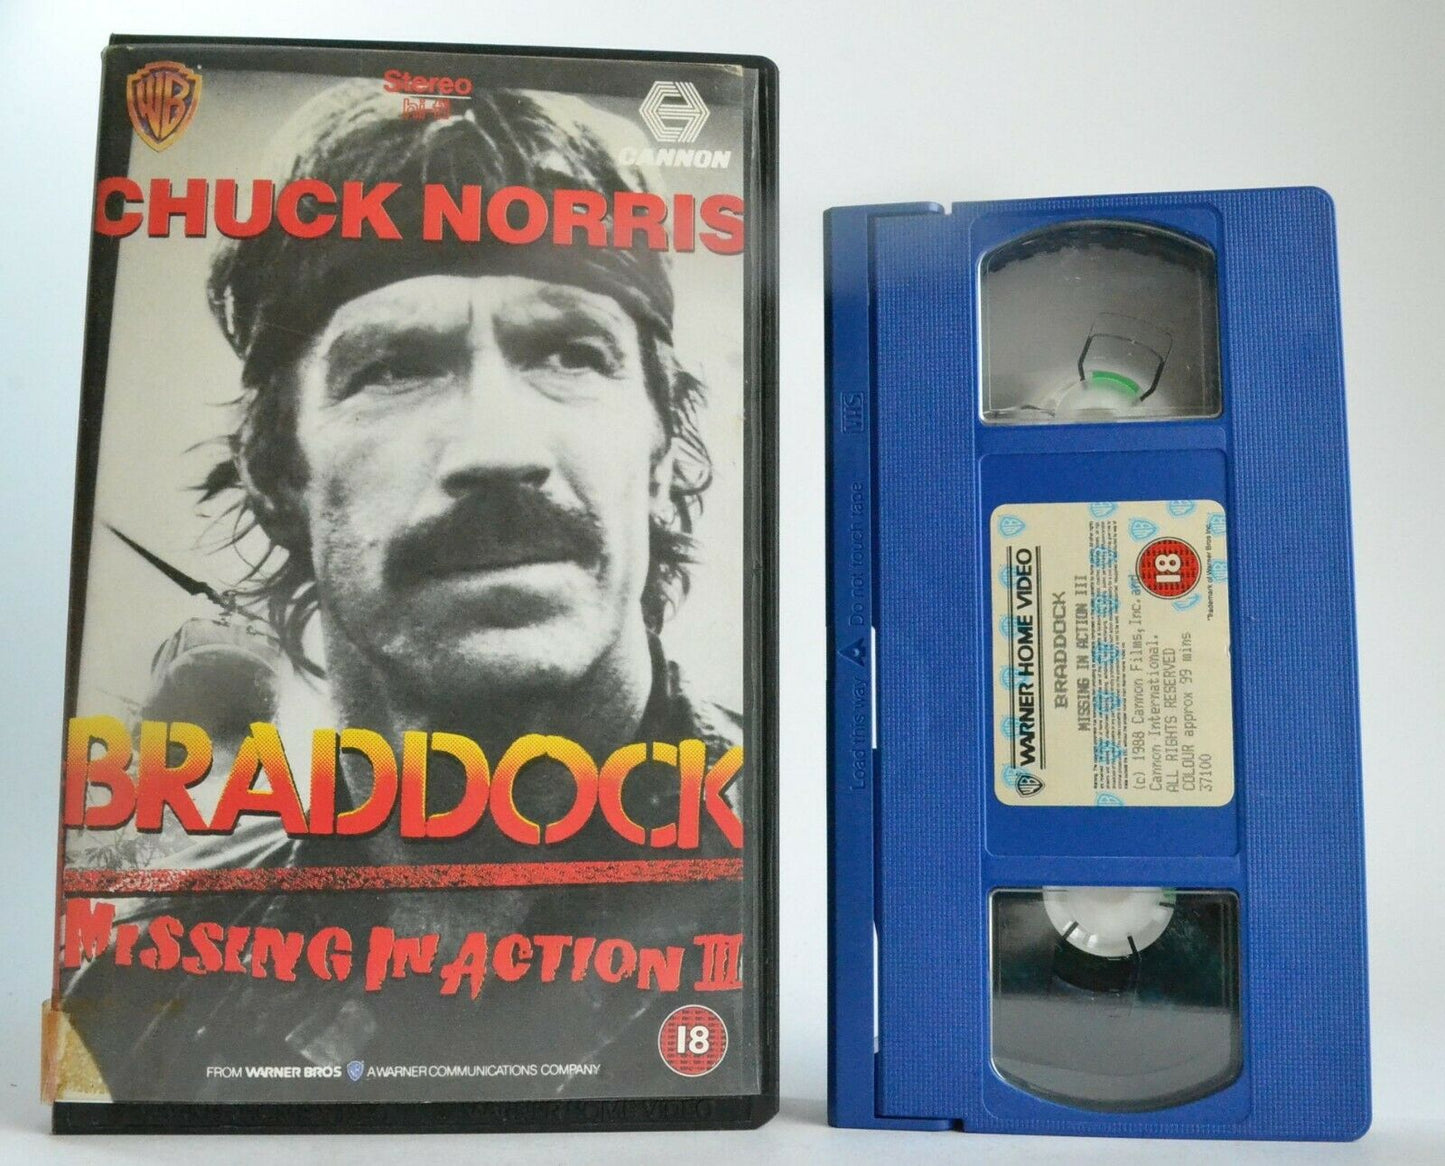 Braddock: Missing in Action 3 (1988) - Action/Adventure - Chuck Norris - Pal VHS-